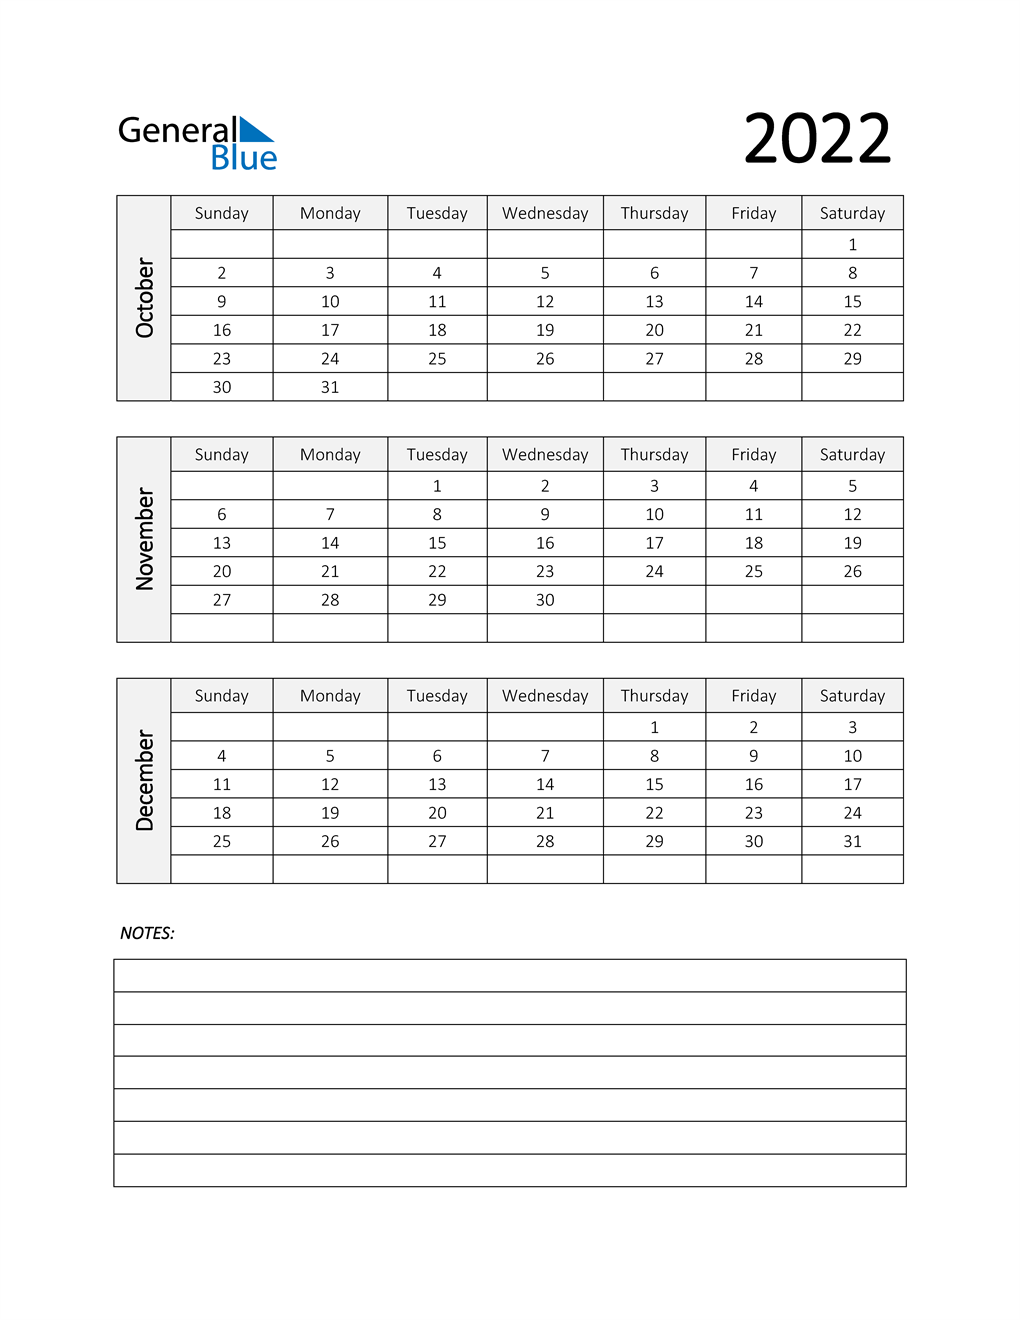  Q4 2022 Calendar with Notes